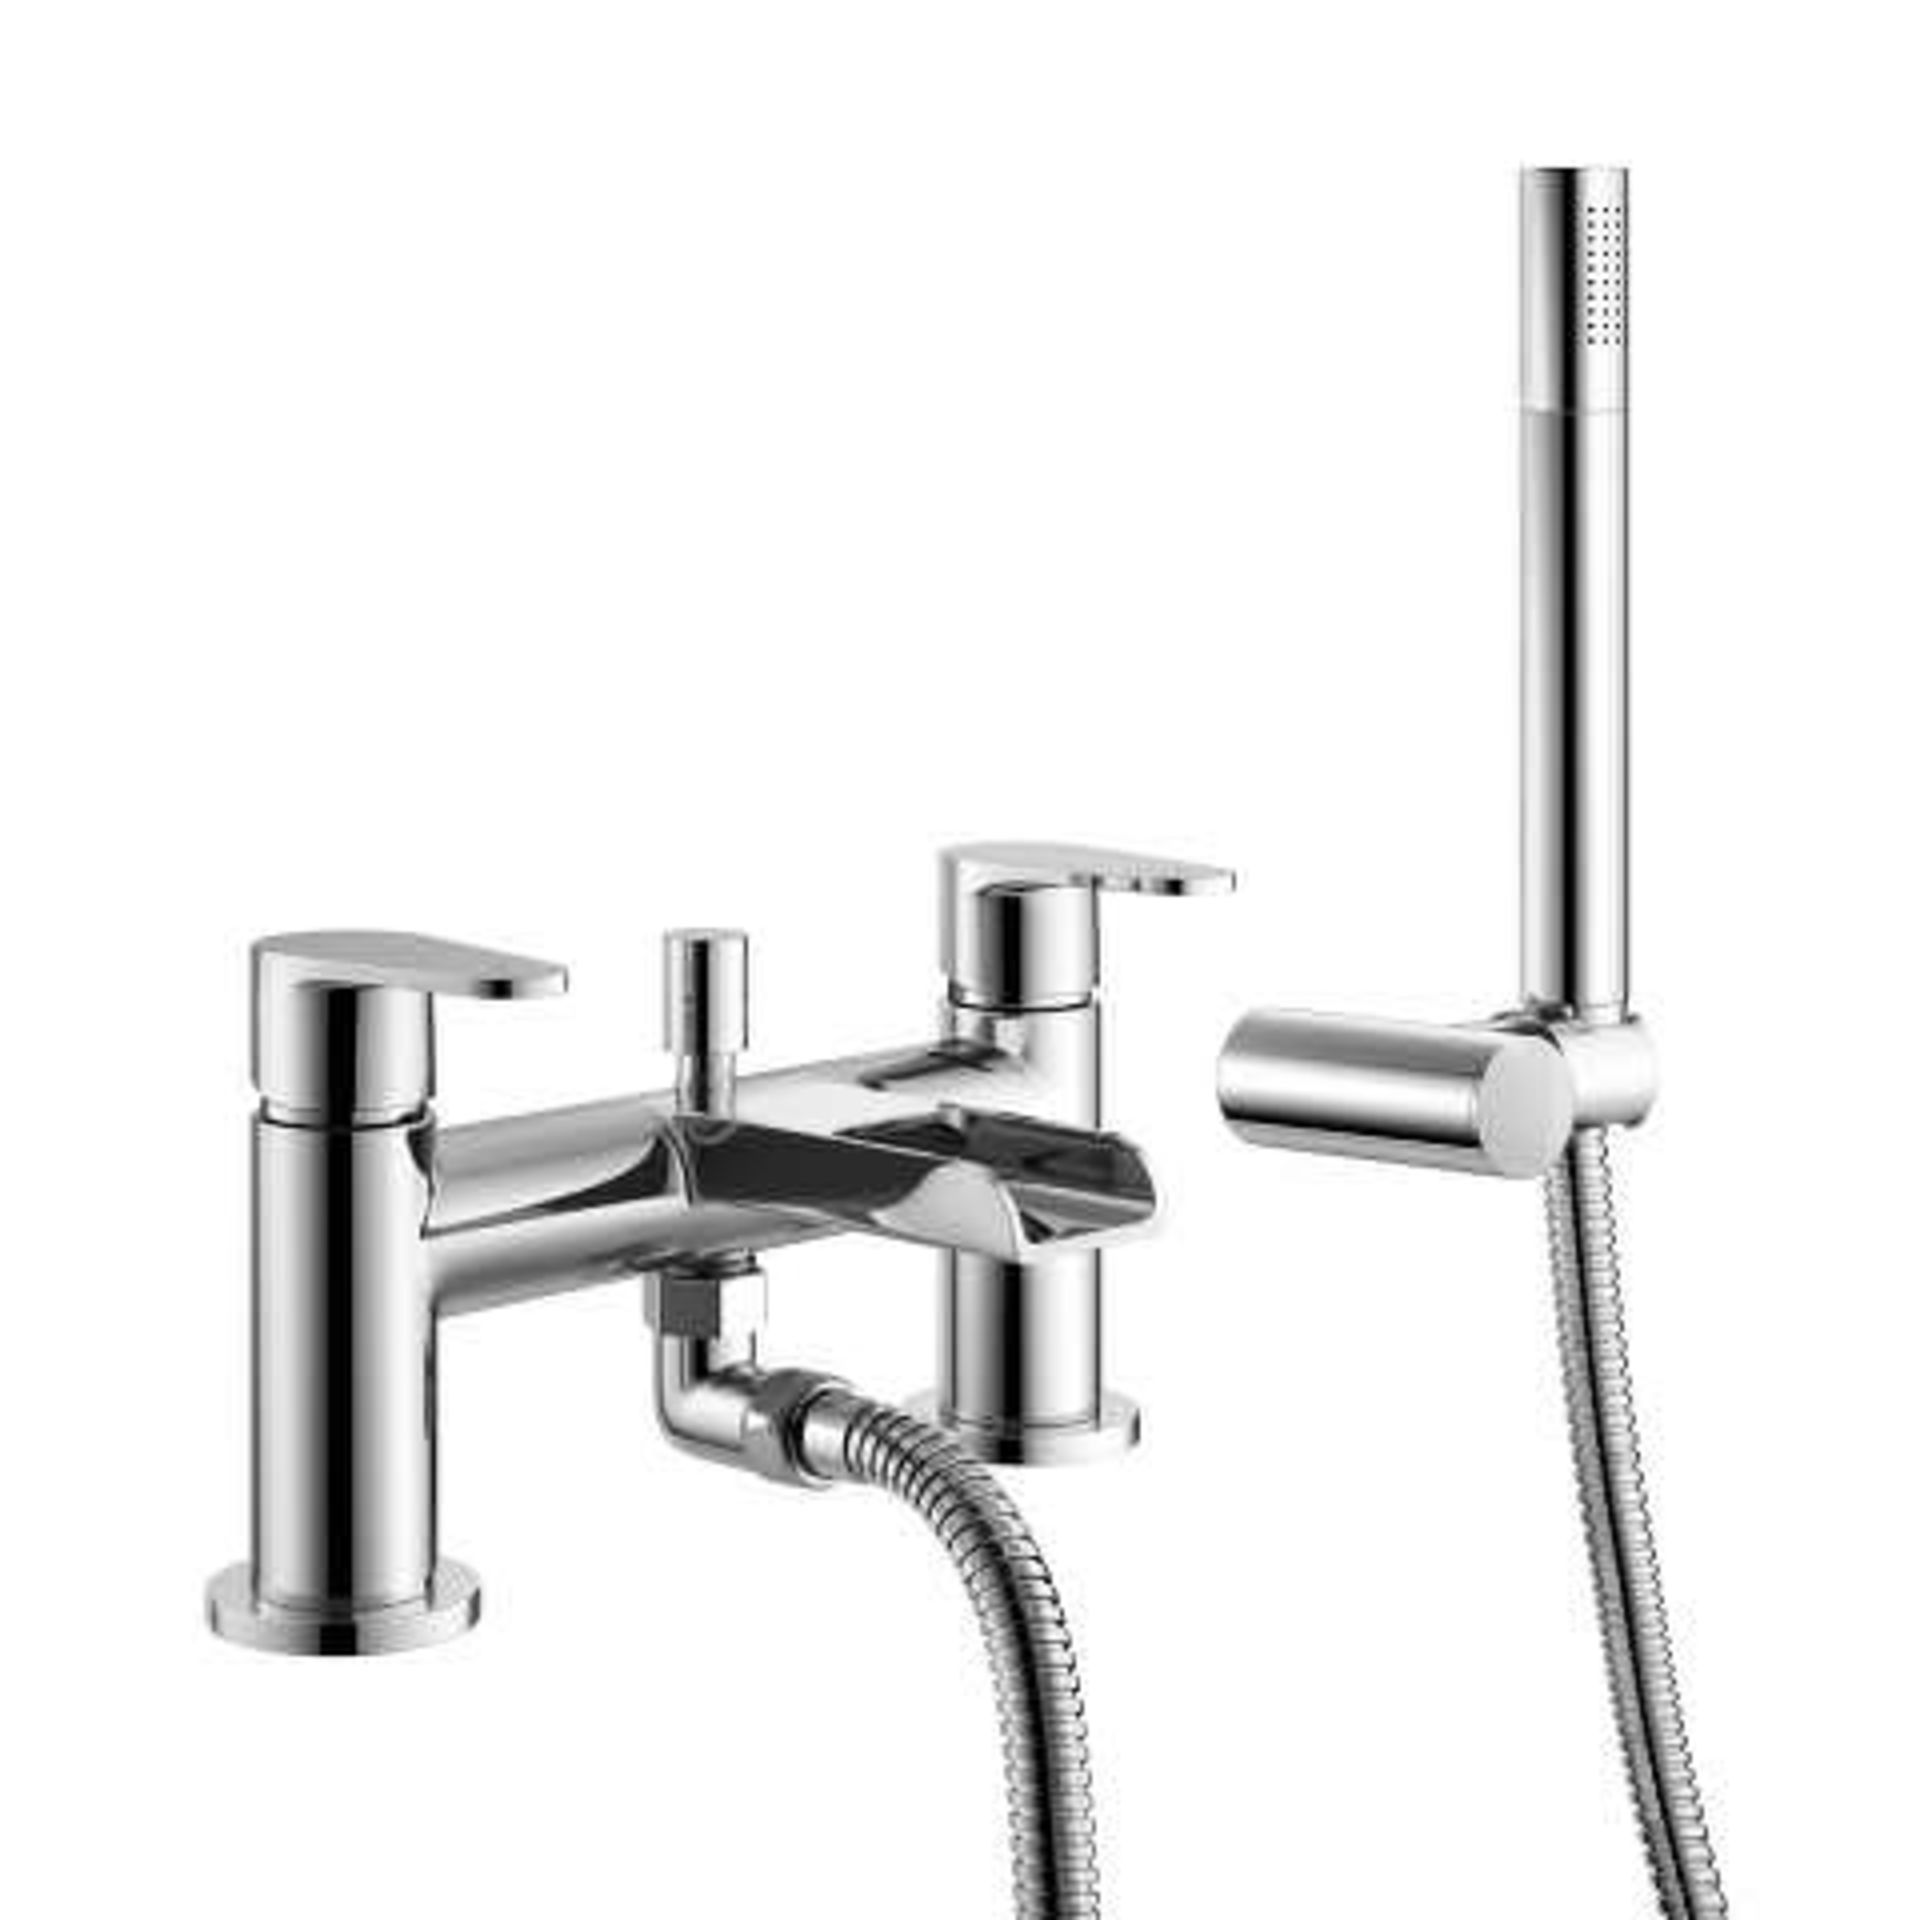 (J13) Cela Waterfall Bath Shower Mixer Tap with Hand Held Shower Head Presenting a contemporary - Image 2 of 3